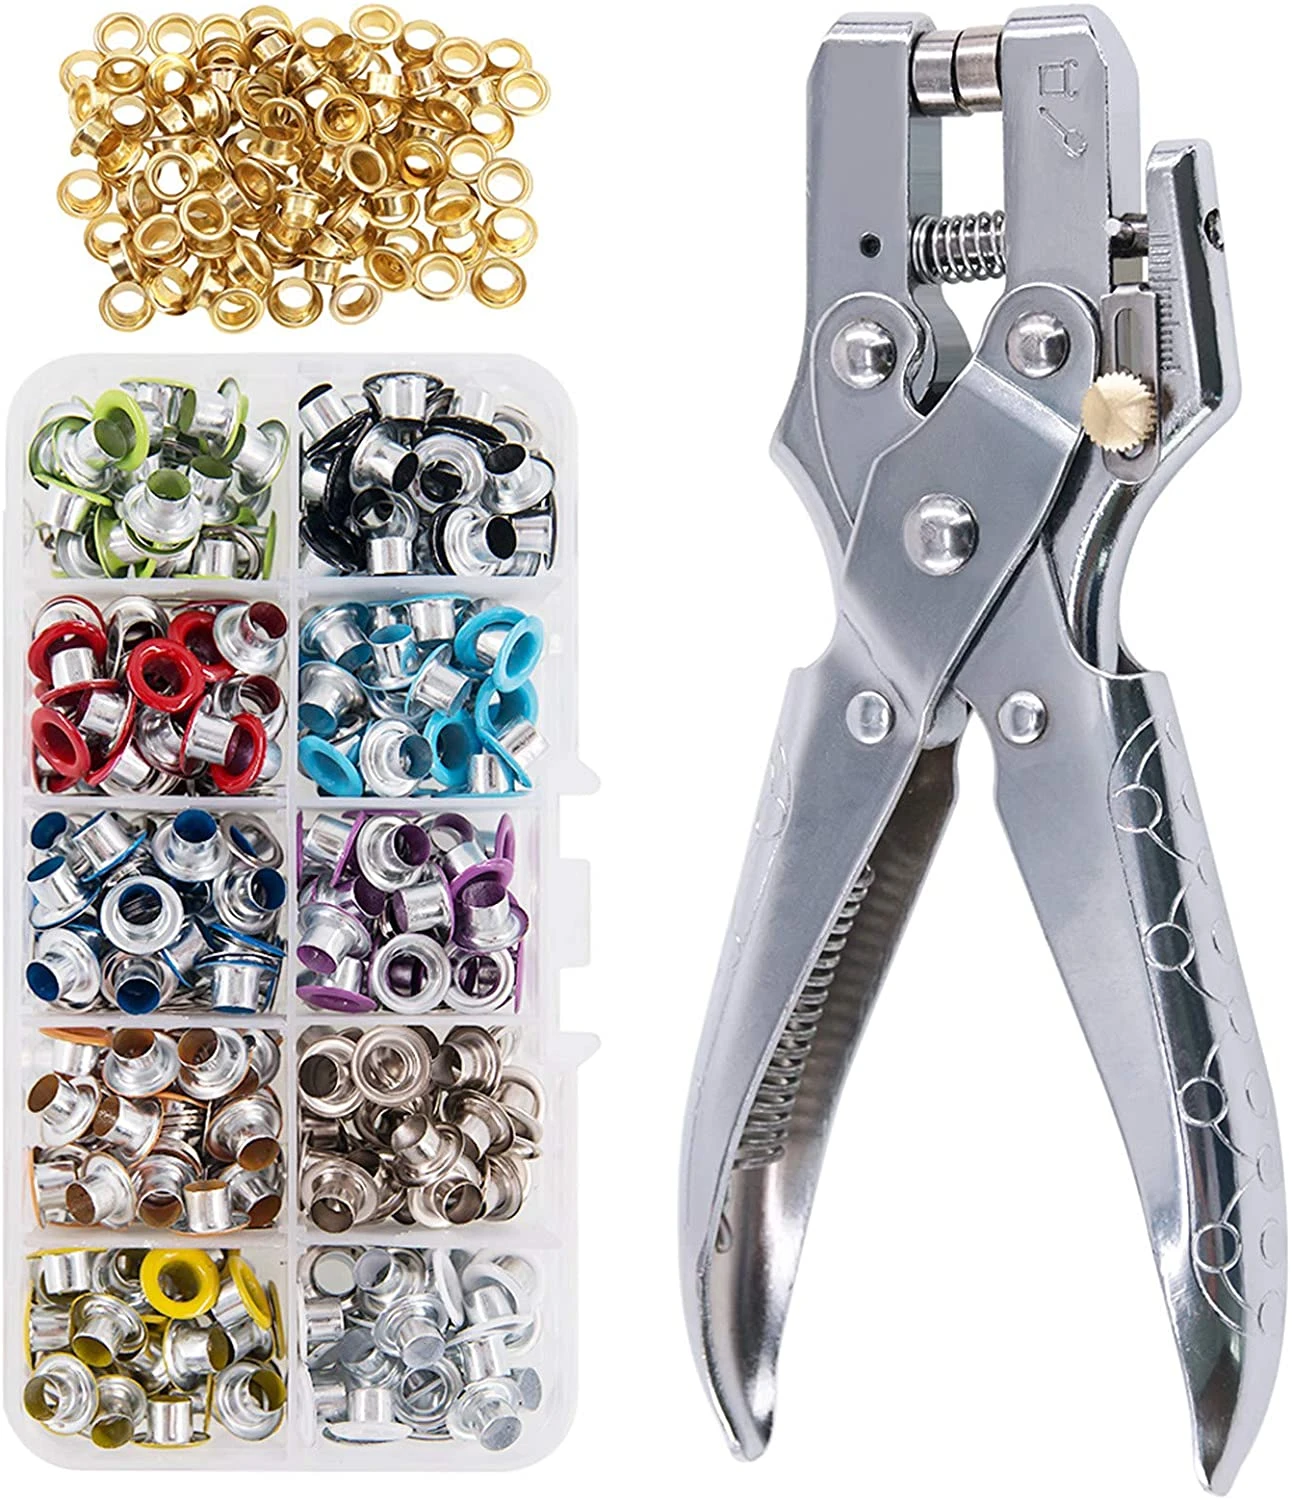 300/540 Sets 5mm Multi-Color Metal Eyelets Grommets Kit with Hole Punch Plier, for Leather, Canvas, Shoes, Belts, Bags, Crafts